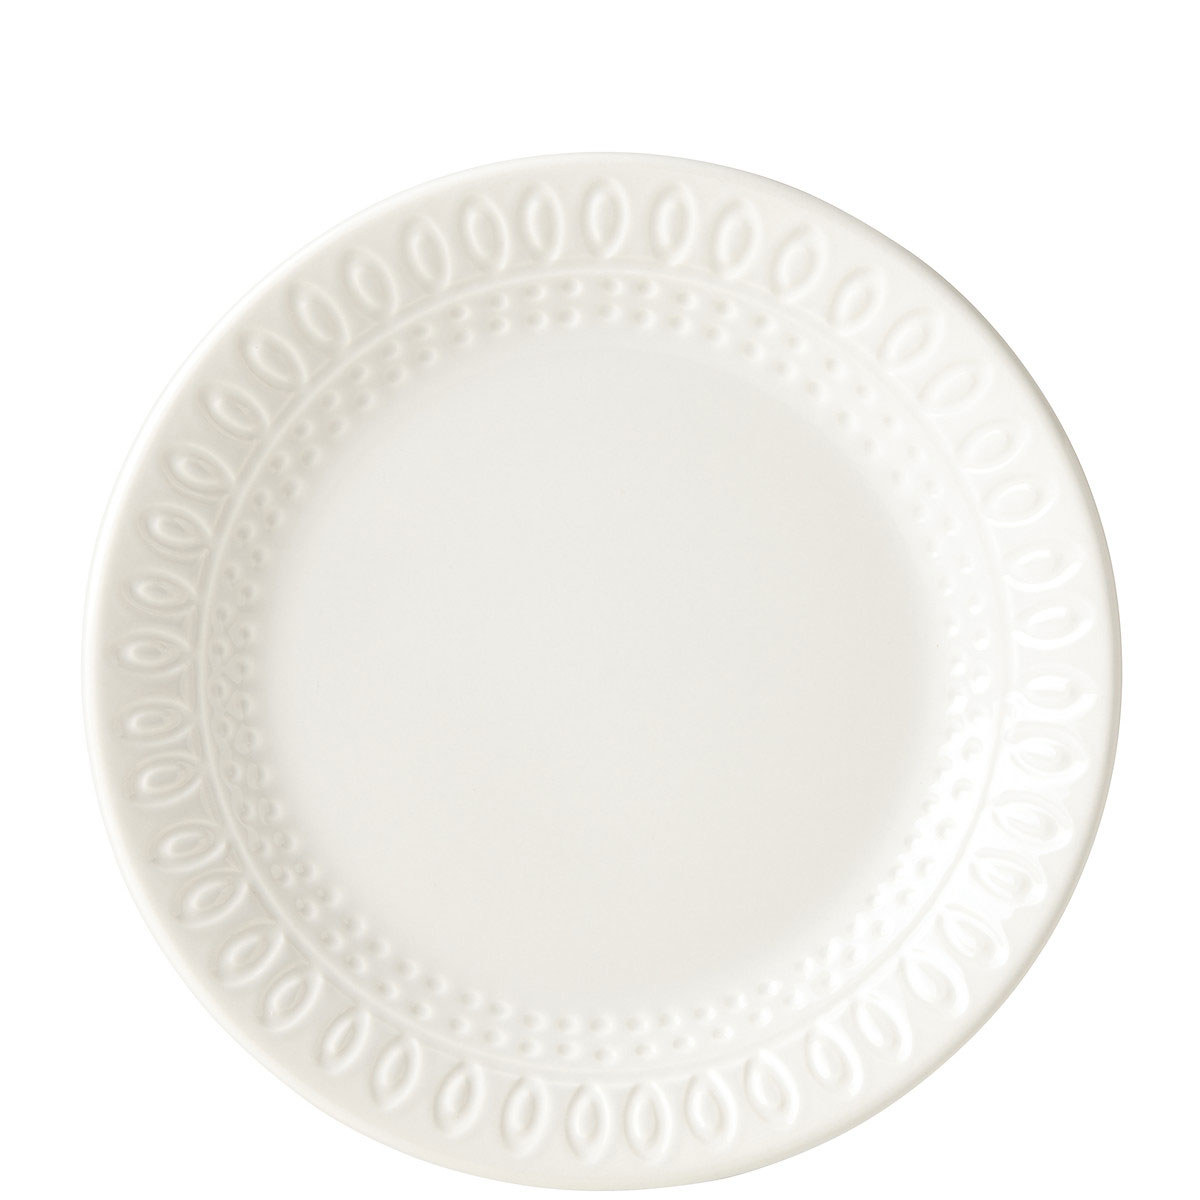 Kate Spade China by Lenox, Willow Drive Cream Accent Plate, Single